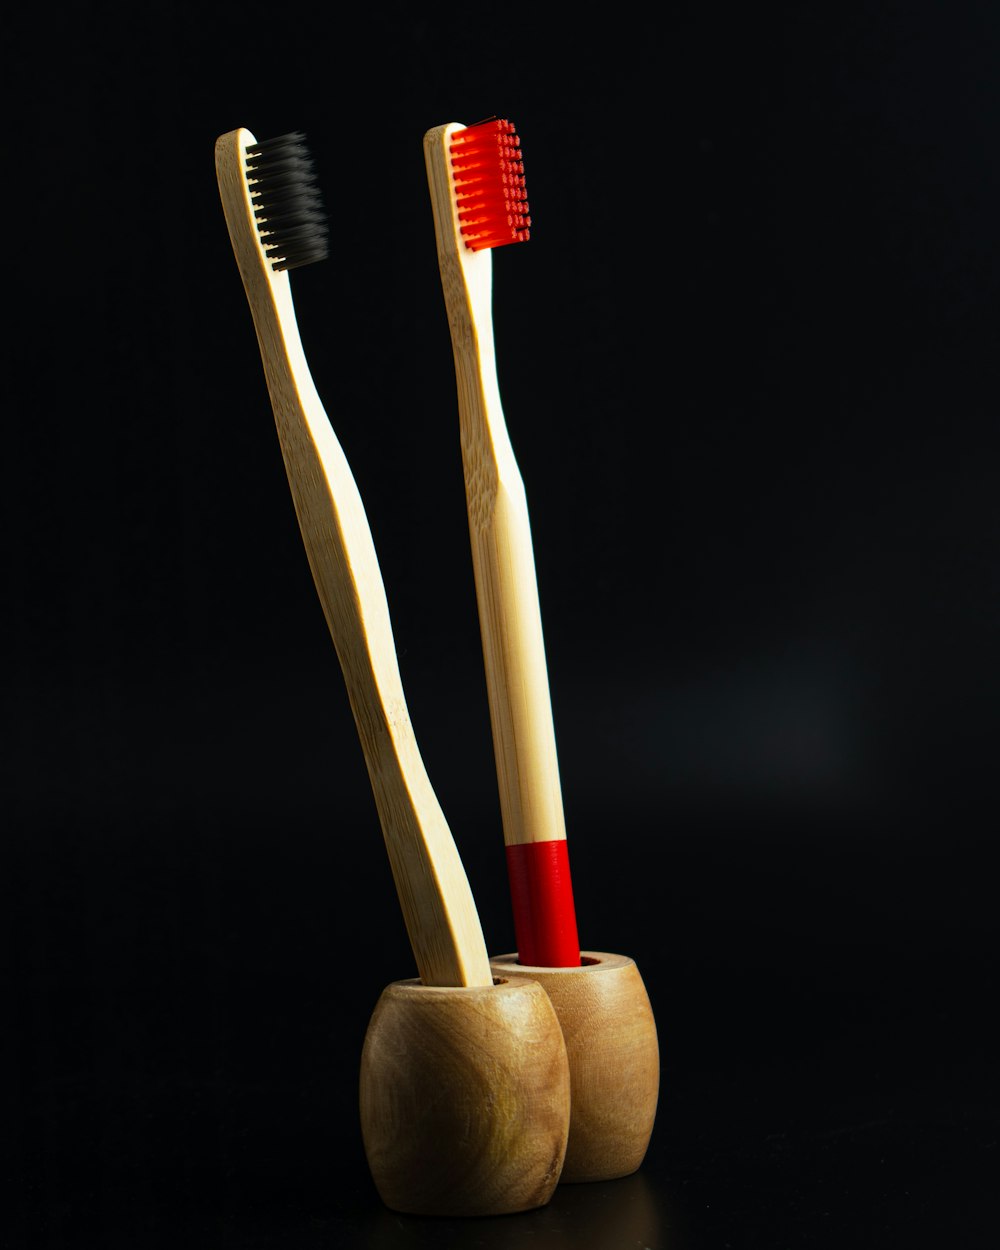 two toothbrushes in a wooden holder on a black background